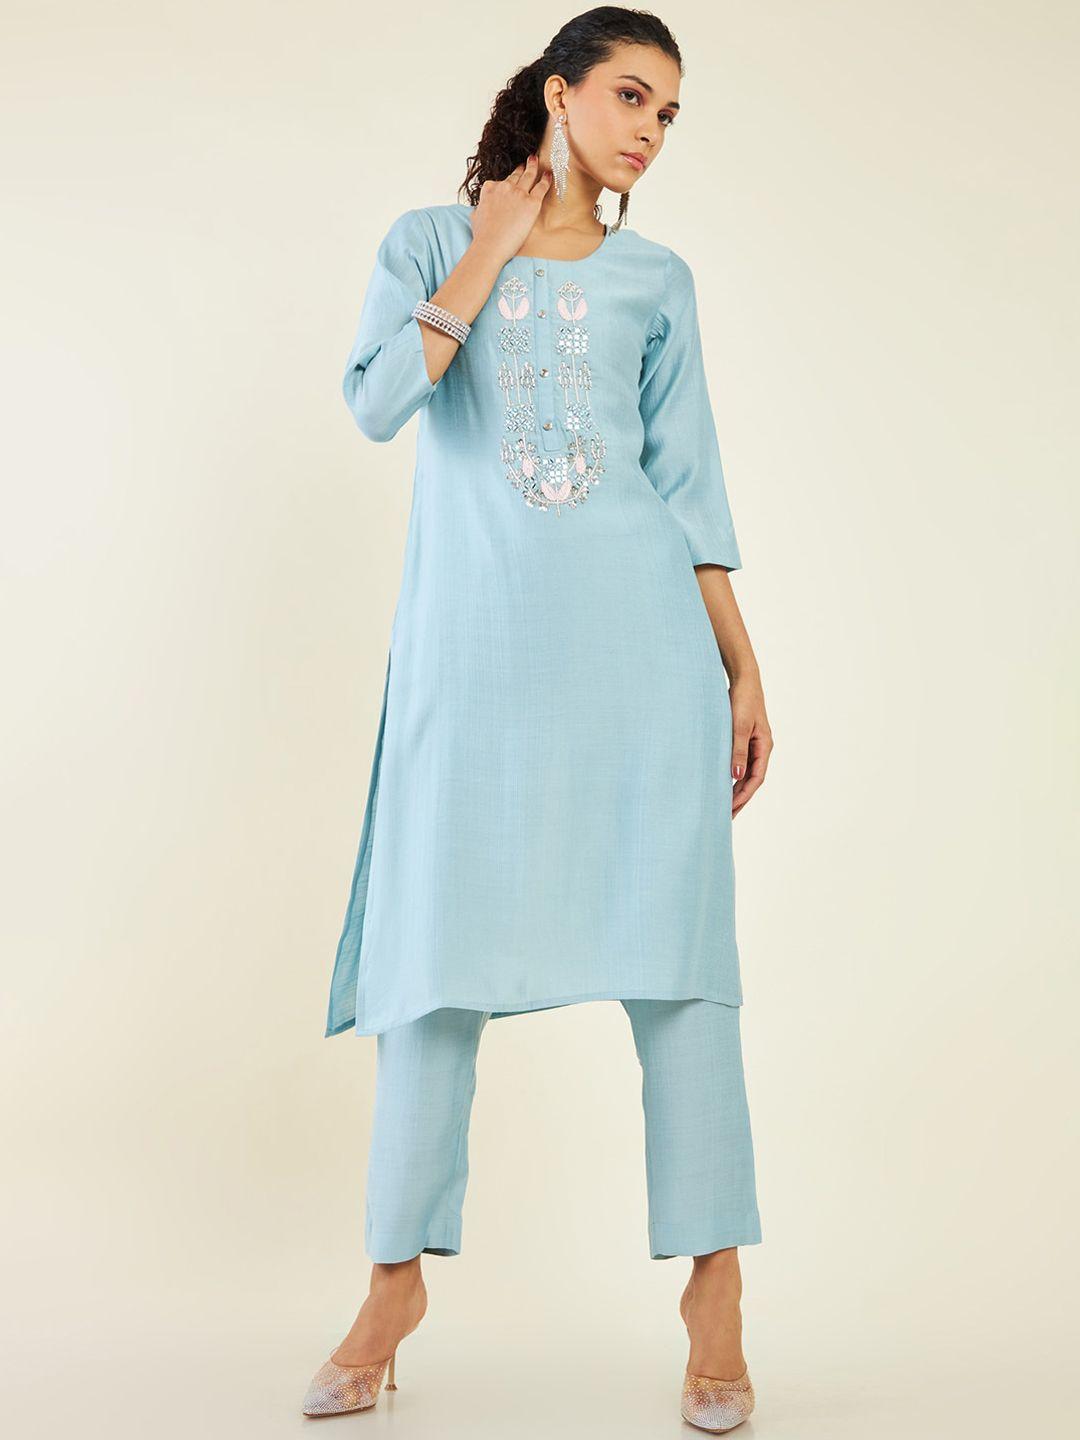 soch-floral-embroidered-mirror-work-kurta-with-trousers